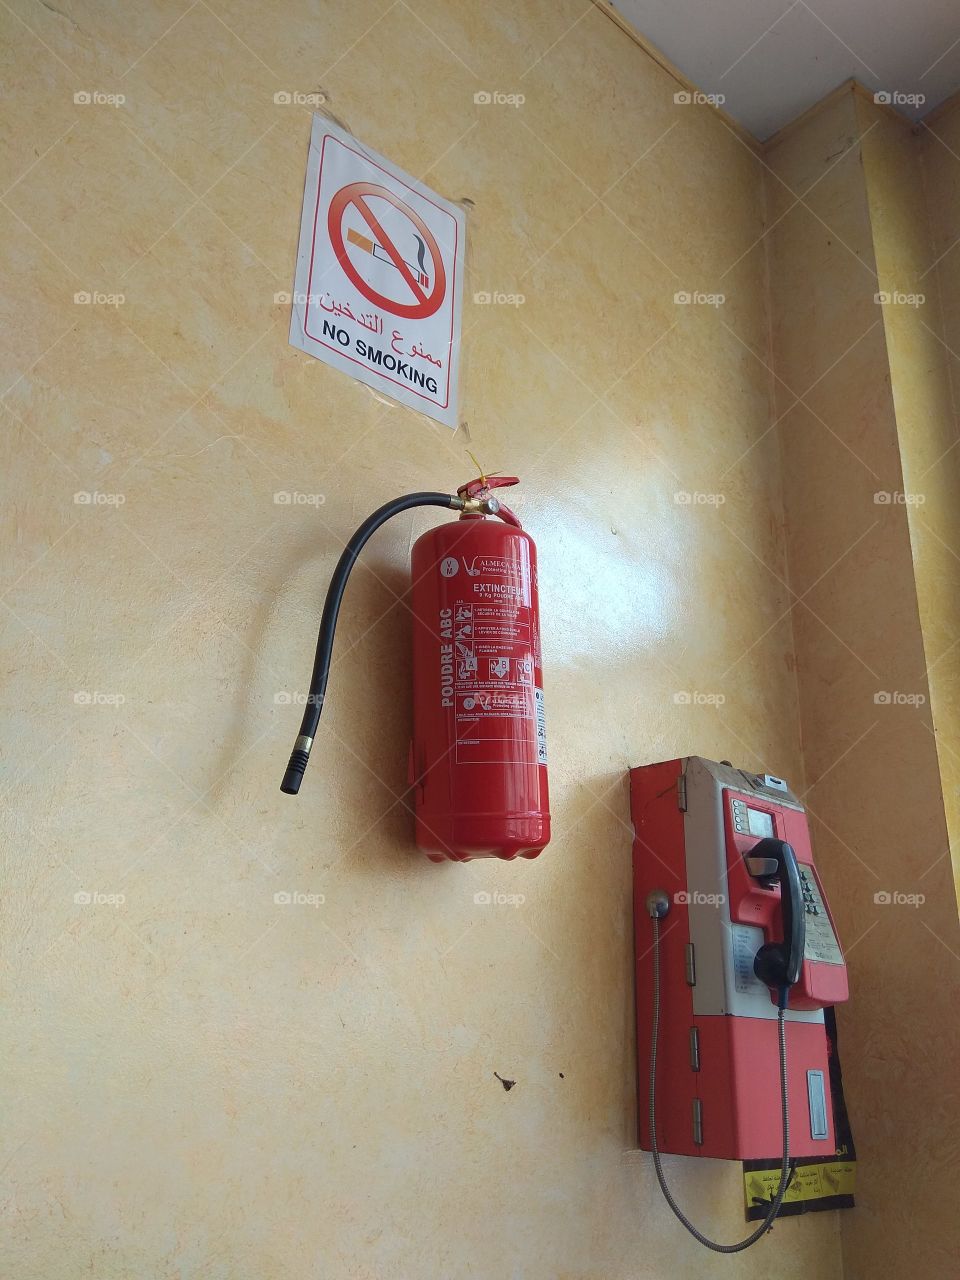 If you smoke close to me, i'll use the fire extinguisher on you and then call the firefighters 👷(i know, make no sense lol😂)